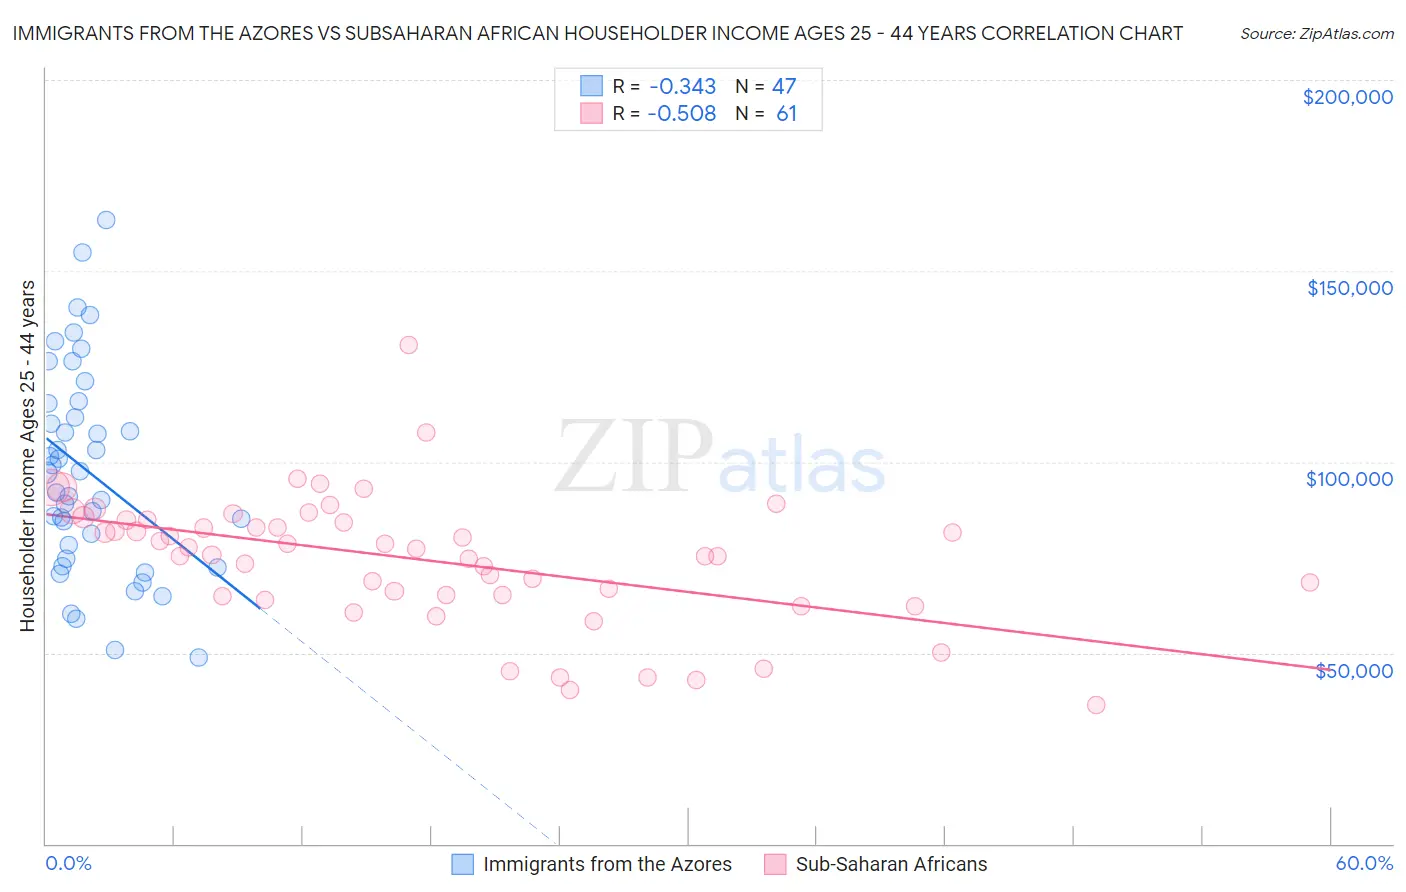 Immigrants from the Azores vs Subsaharan African Householder Income Ages 25 - 44 years